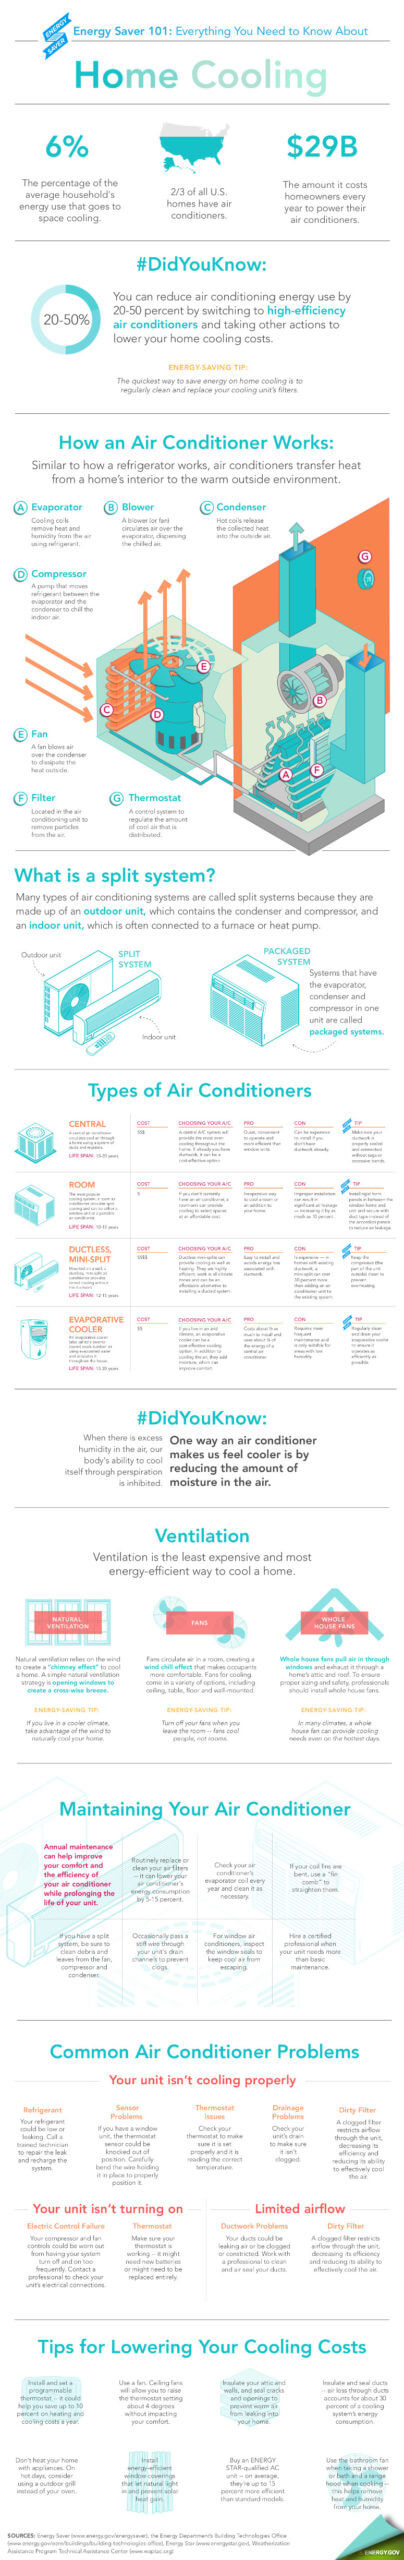 Here are Energy Saving tips on how to cool your home from Integrity Air Conditioning.